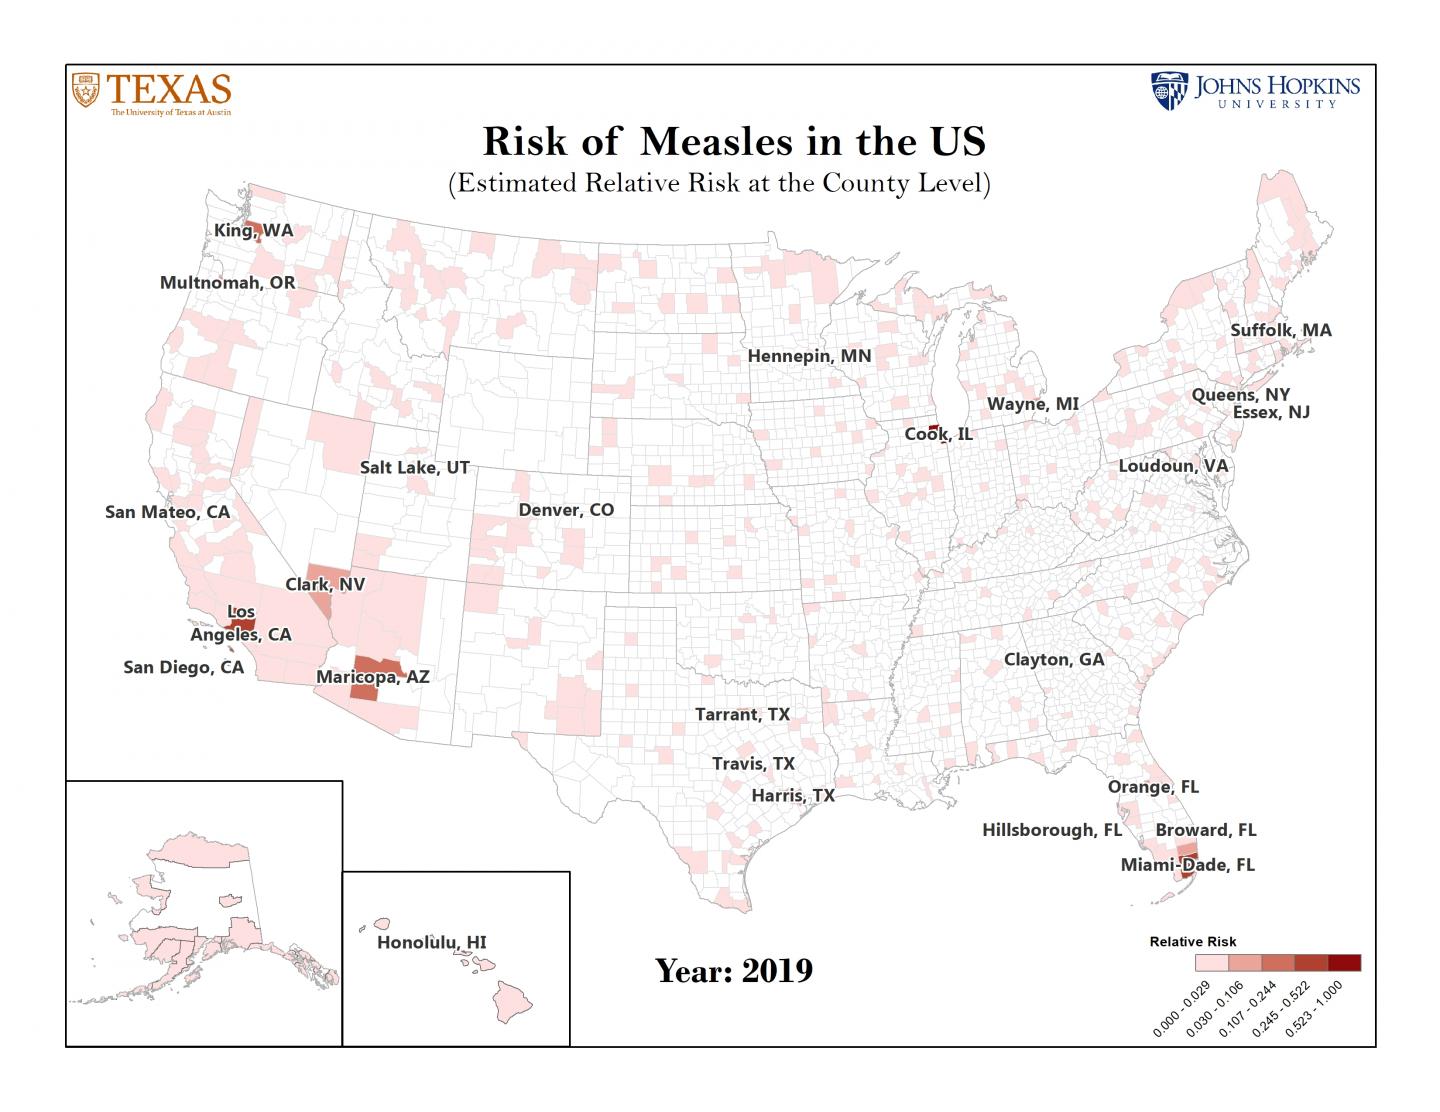 Top 25 Counties at Risk for Measles Outbreaks in 2019